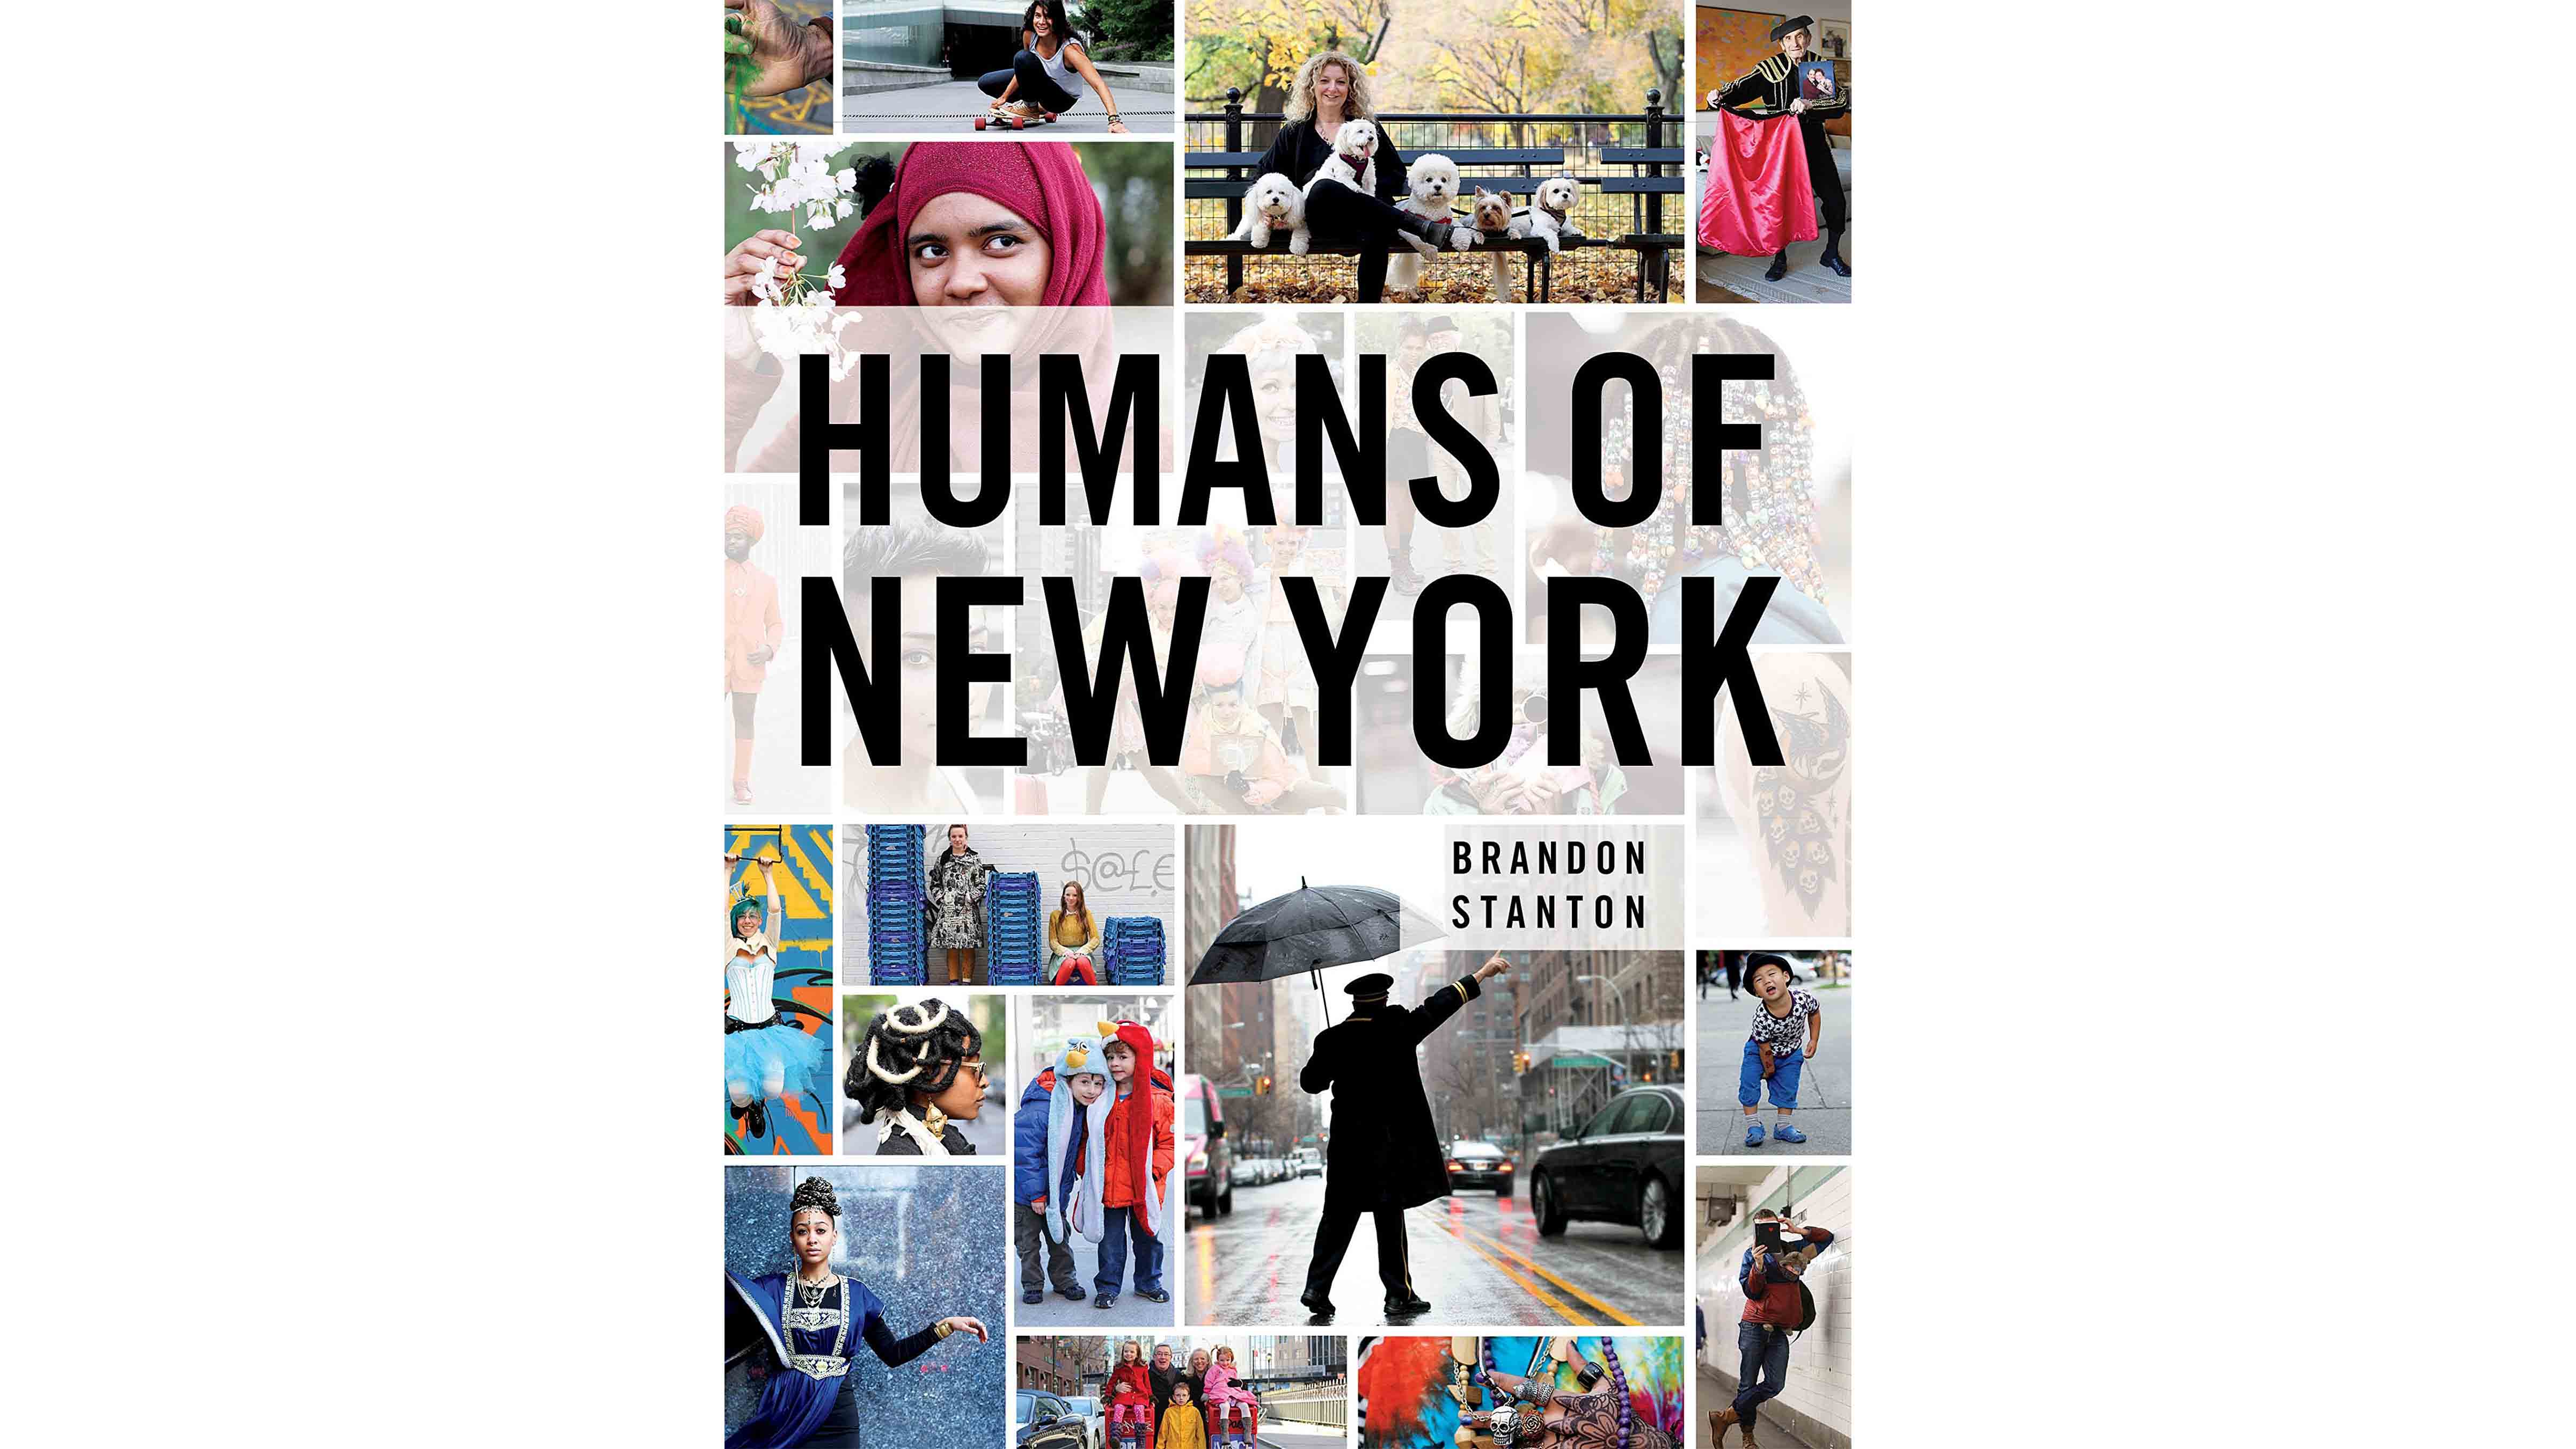 Cover of Humans of New York, one of the best books on photography